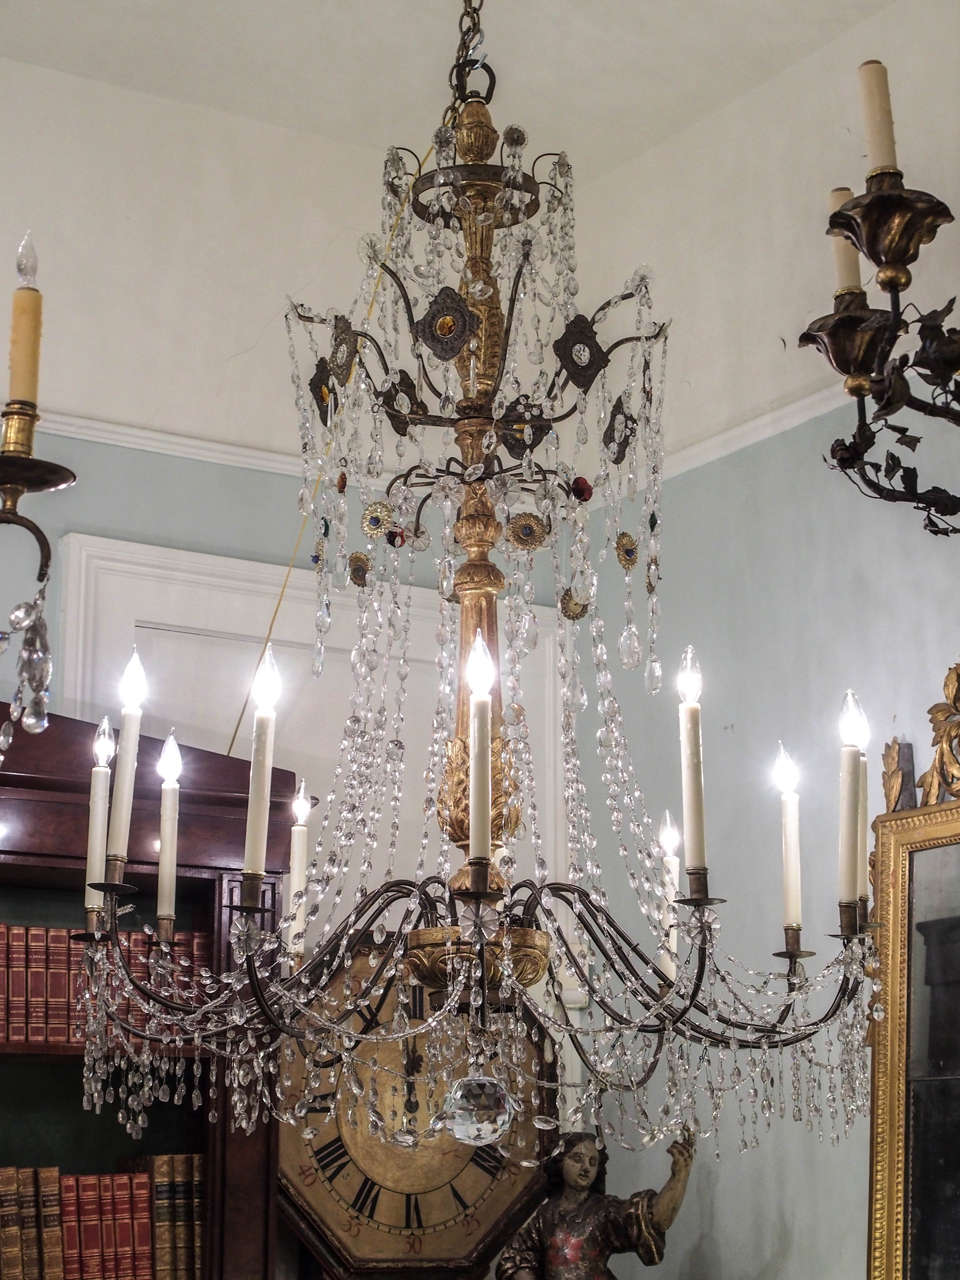 Pair of 19th century Genovese giltwood, iron and crystal twelve-light chandelier with crystal and brass medallions. This pair has the hand-wrought iron arms that fit exactly into the one spot on the central iron wheel as each is hand-cut. They have